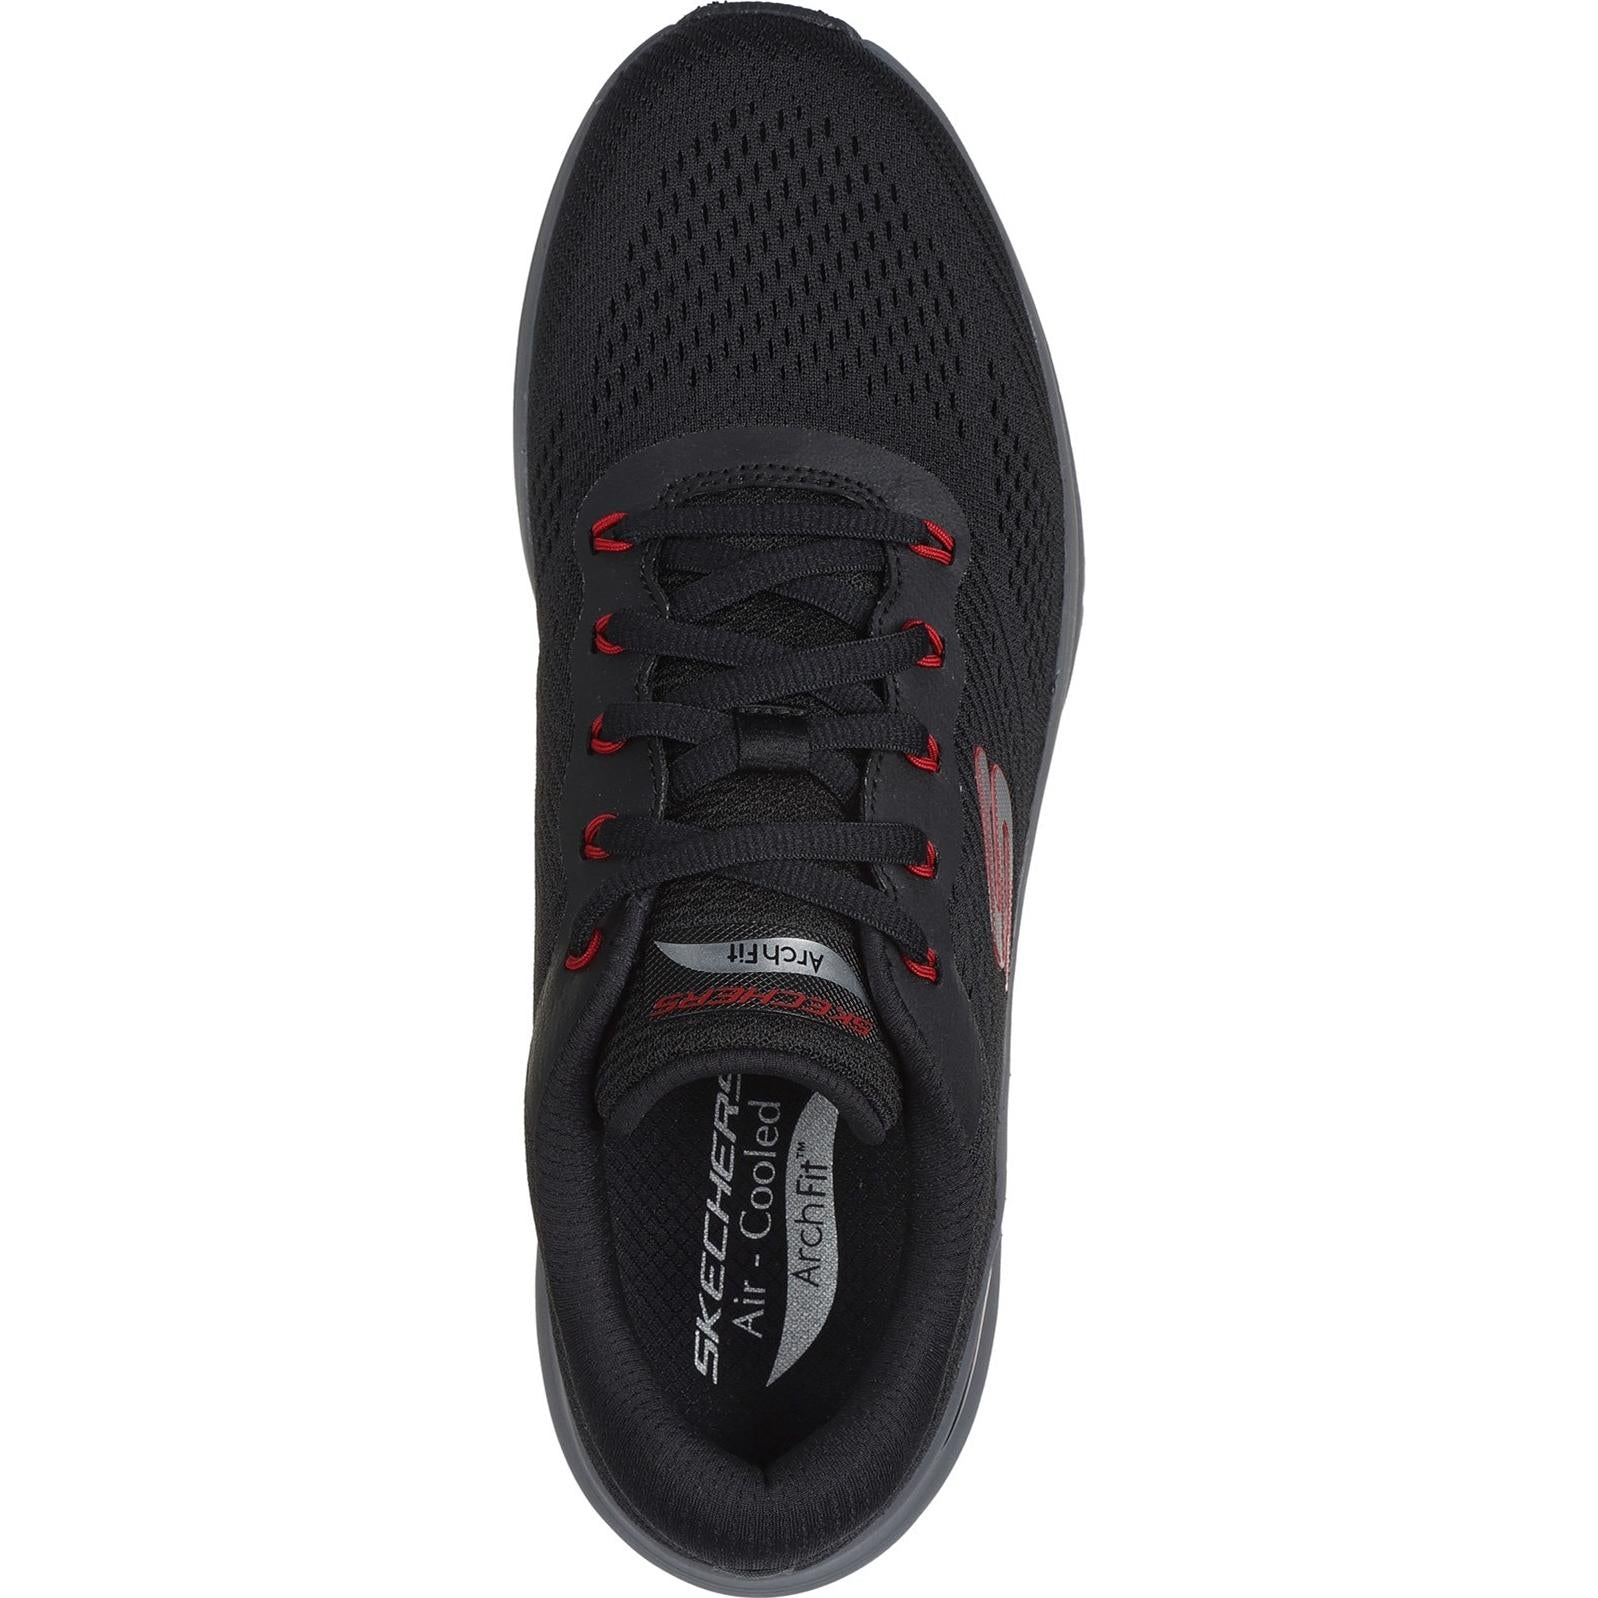 Skechers Arch Fit 2.0 Trainer